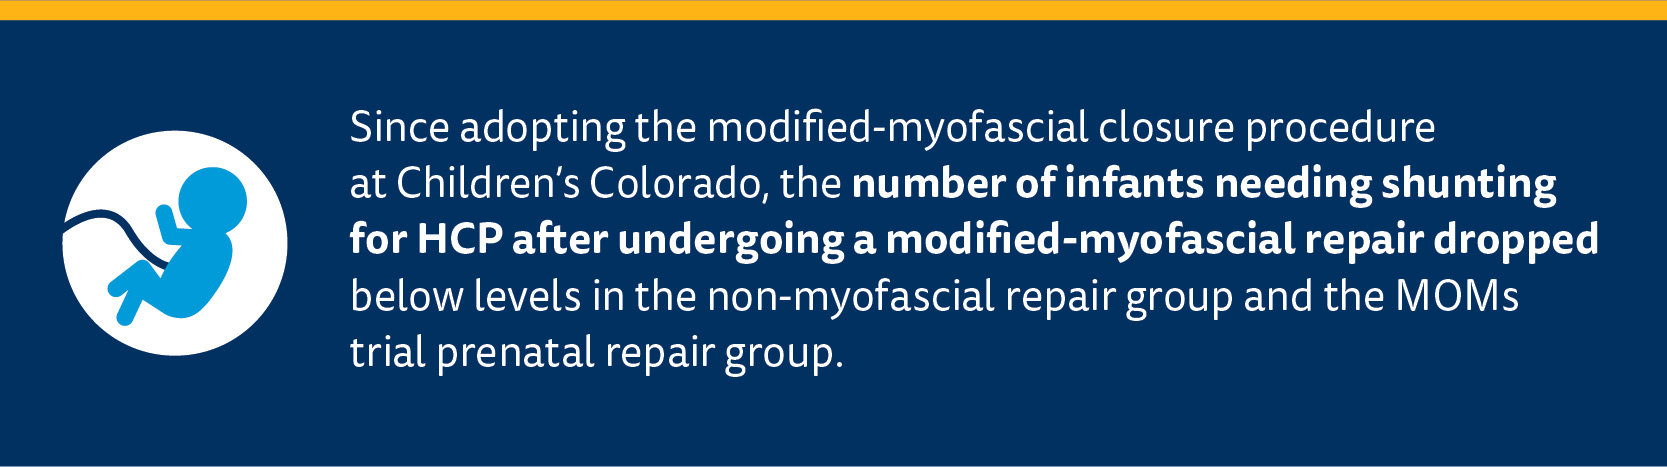 CFCC_Early Outcomes of a Myofascial Repair graphics-3.jpg